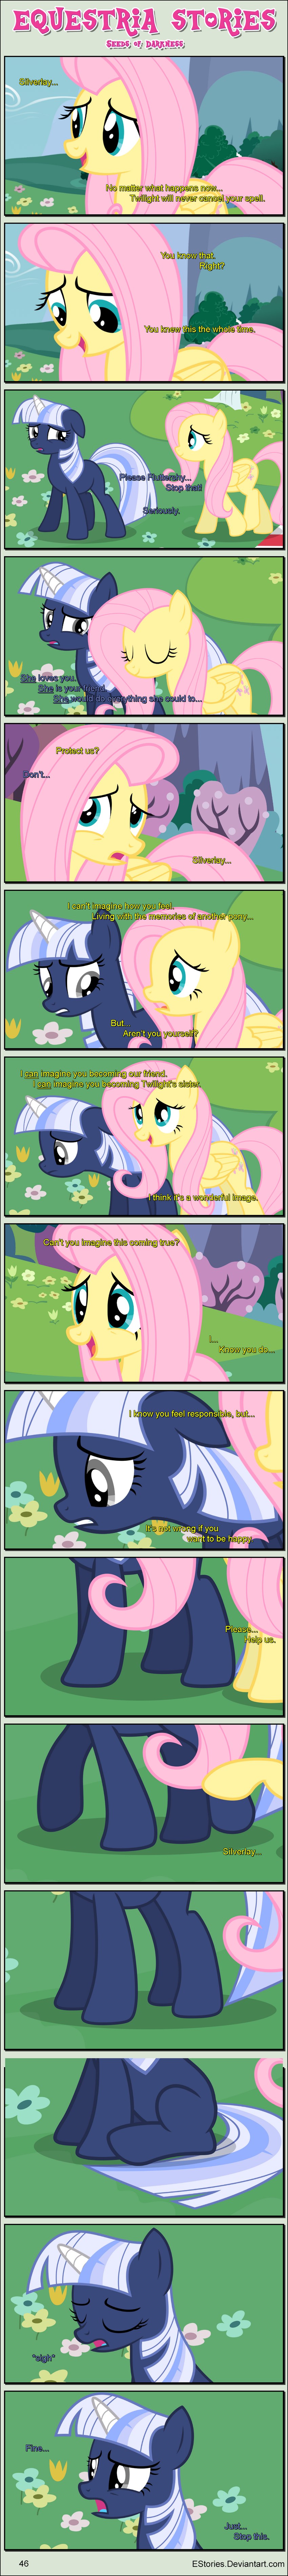 fluttershy and silverlay (friendship is magic and etc) created by estories